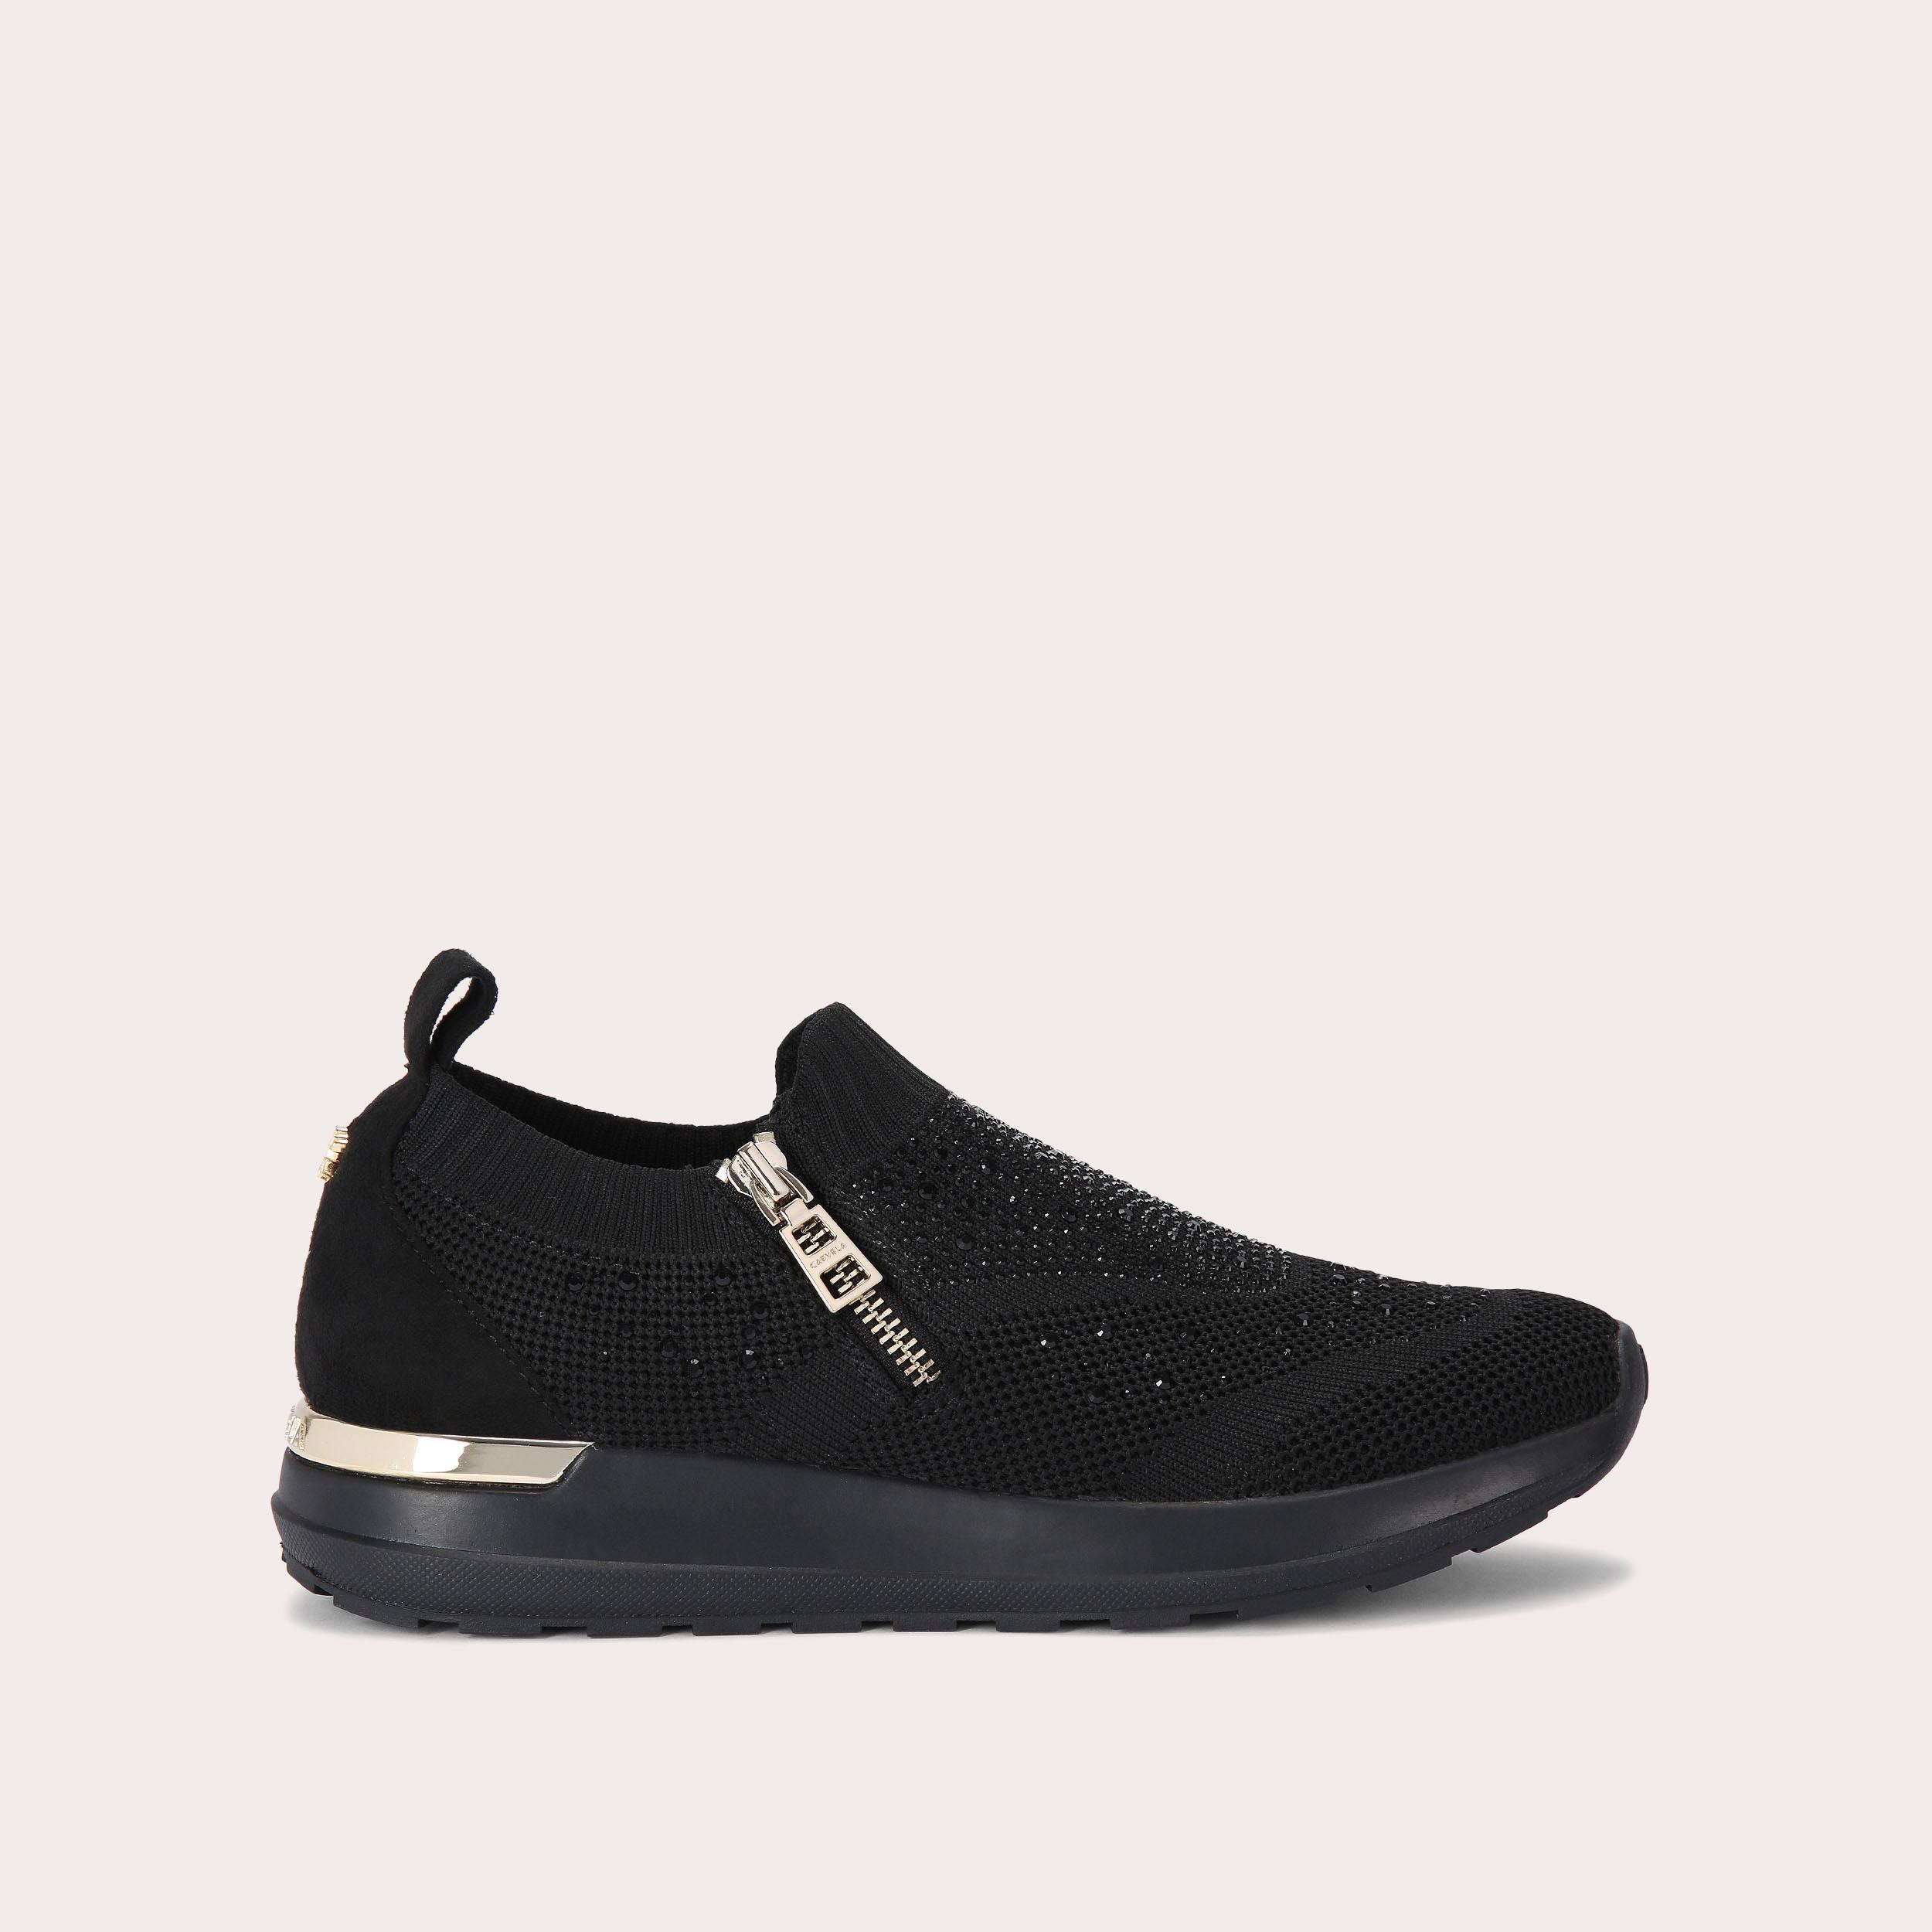 RIO ZIP Black Fabric Trainers by CARVELA